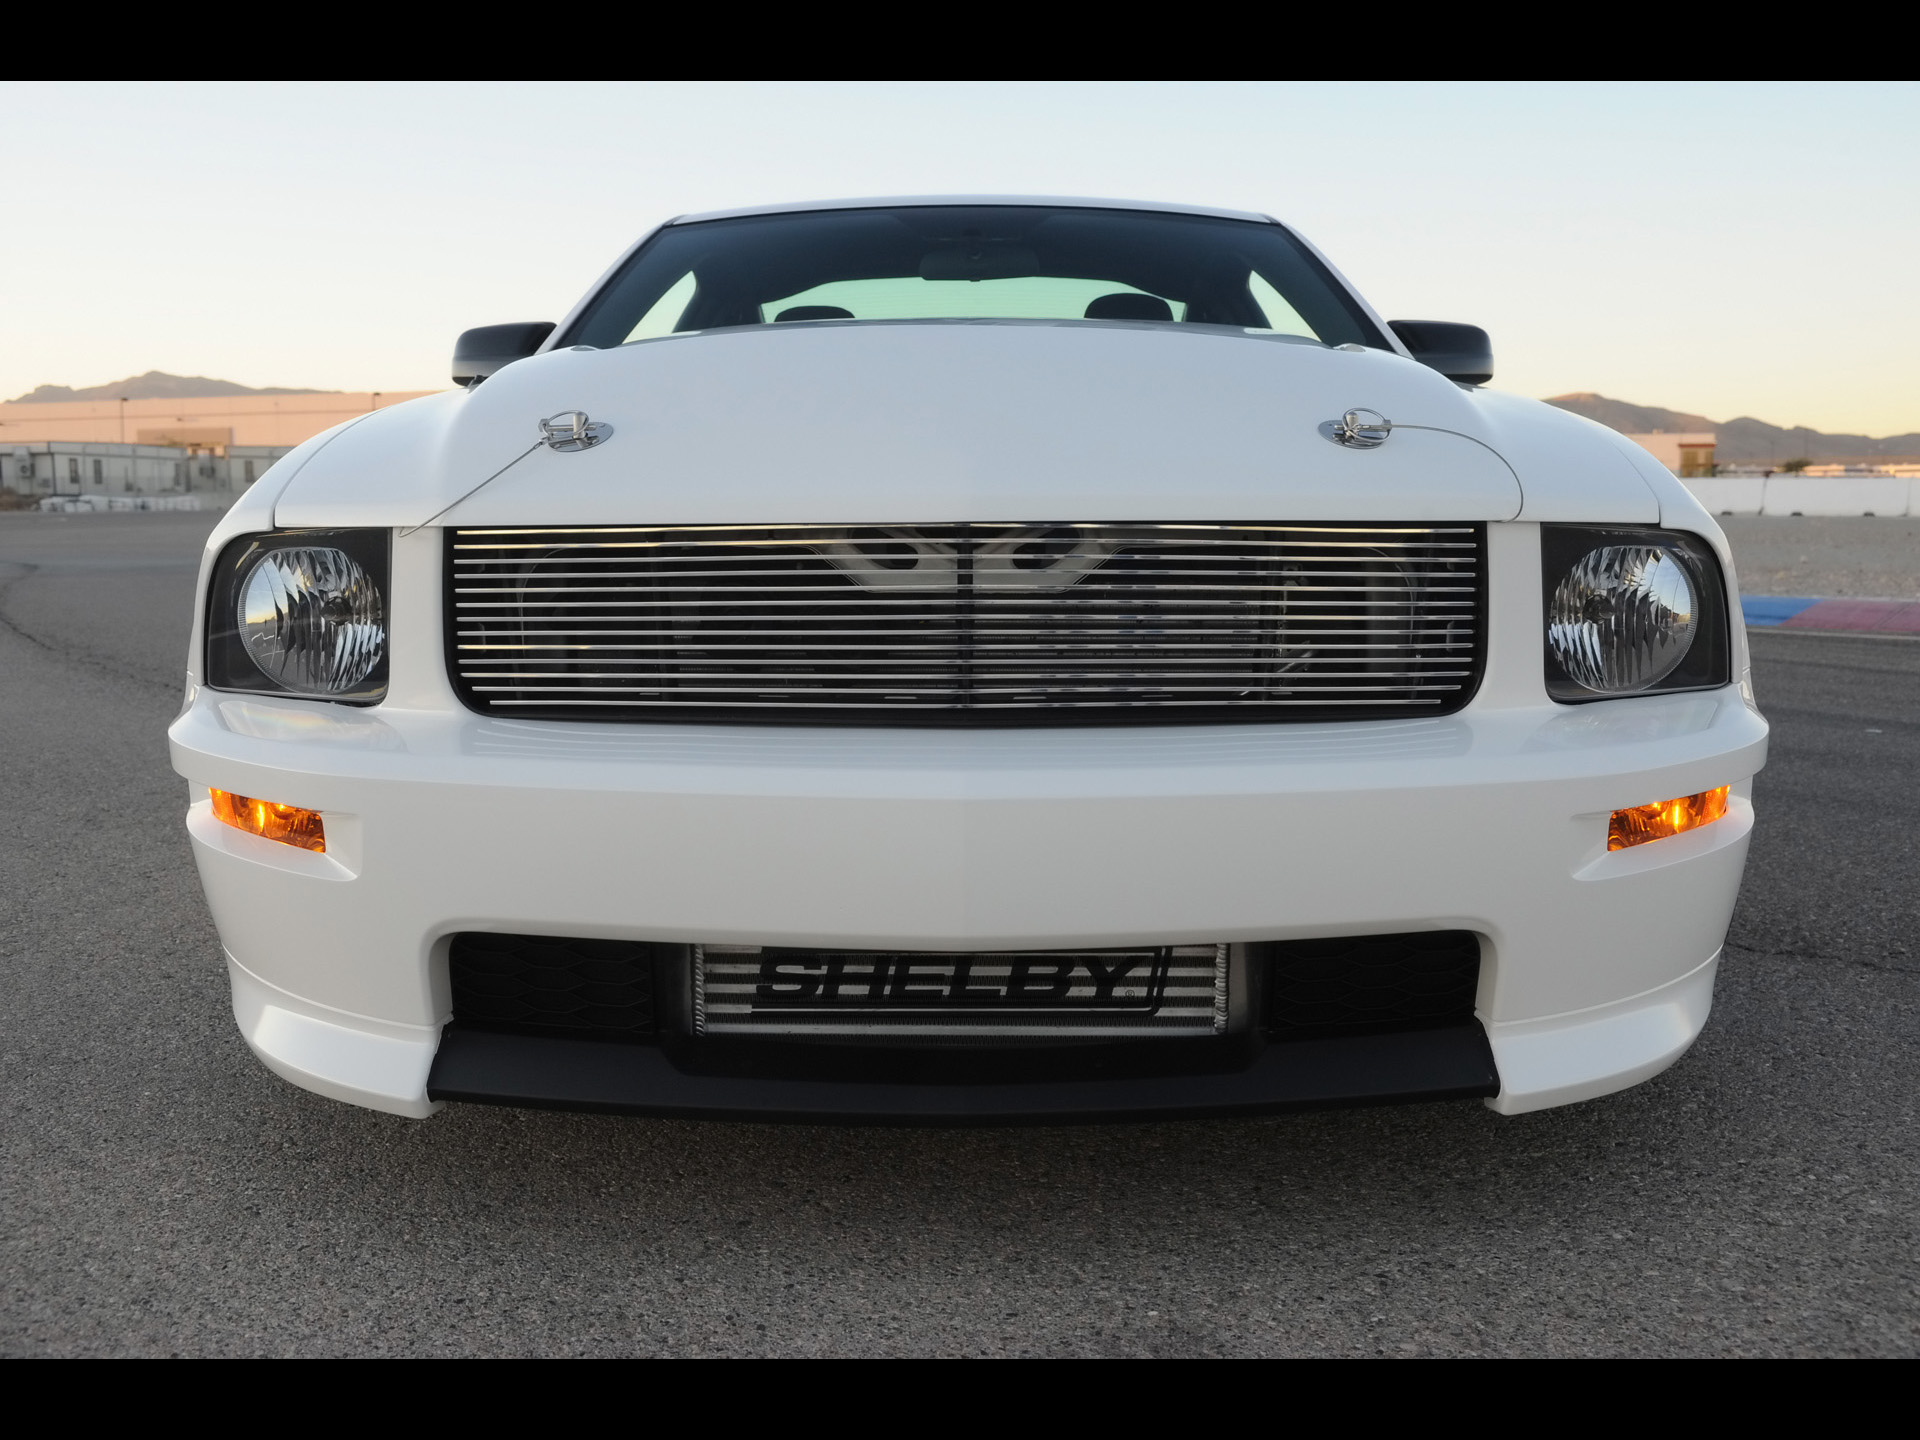 2009, Ford, Mustang, G t, Shelby, Turbo, Muscle Wallpaper